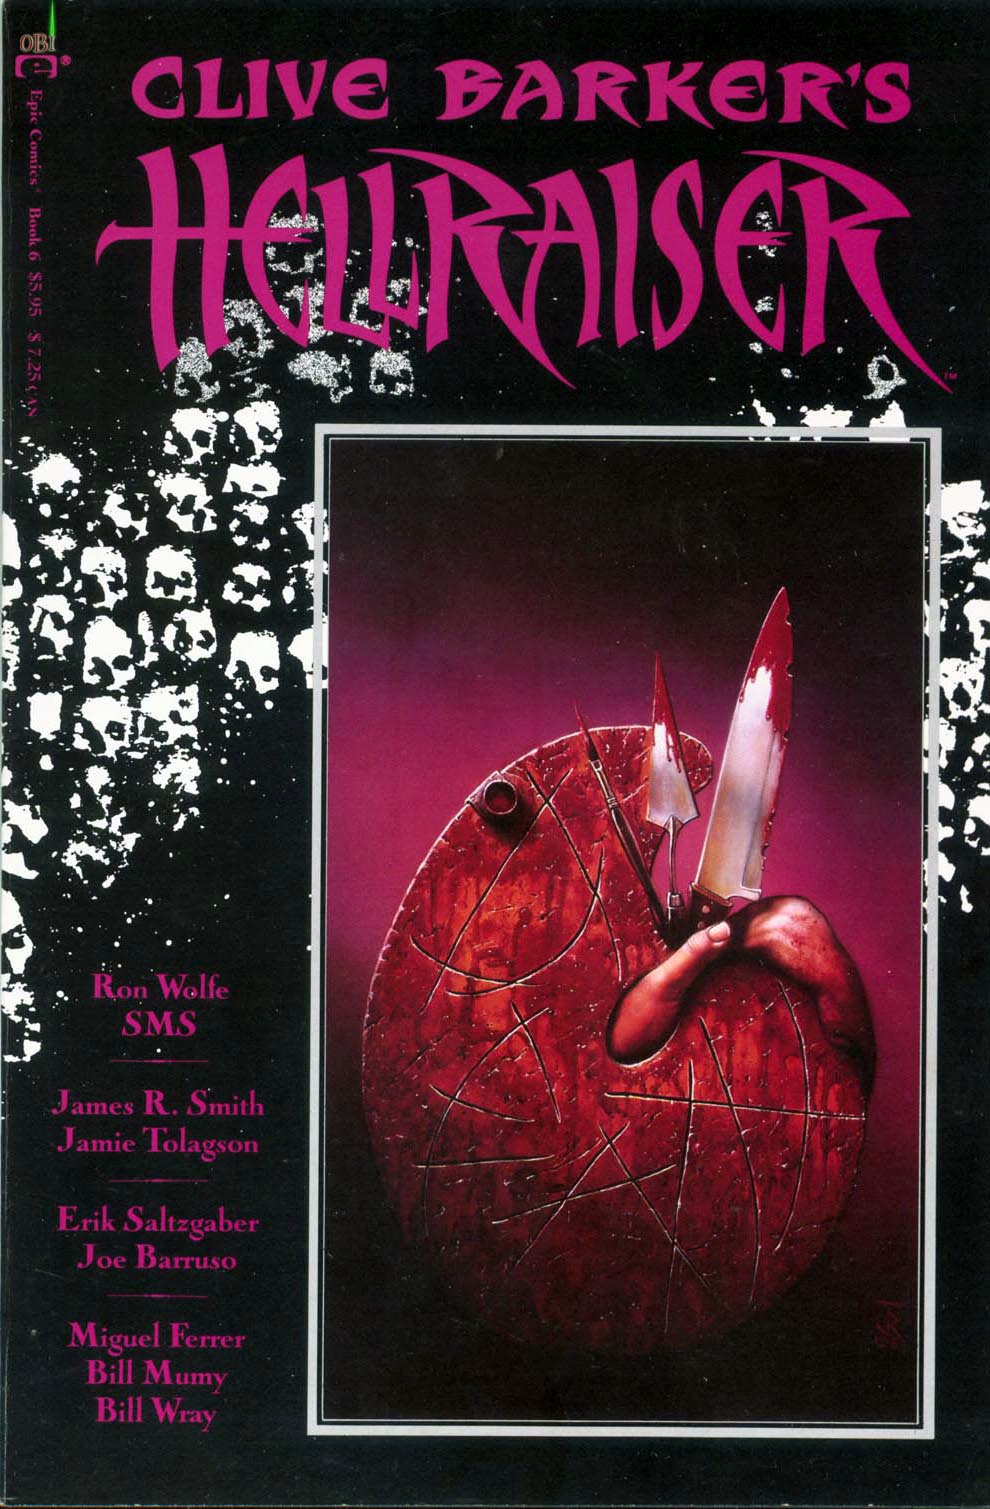 Clive Barker’s Hellraiser issue 6 Retro Review